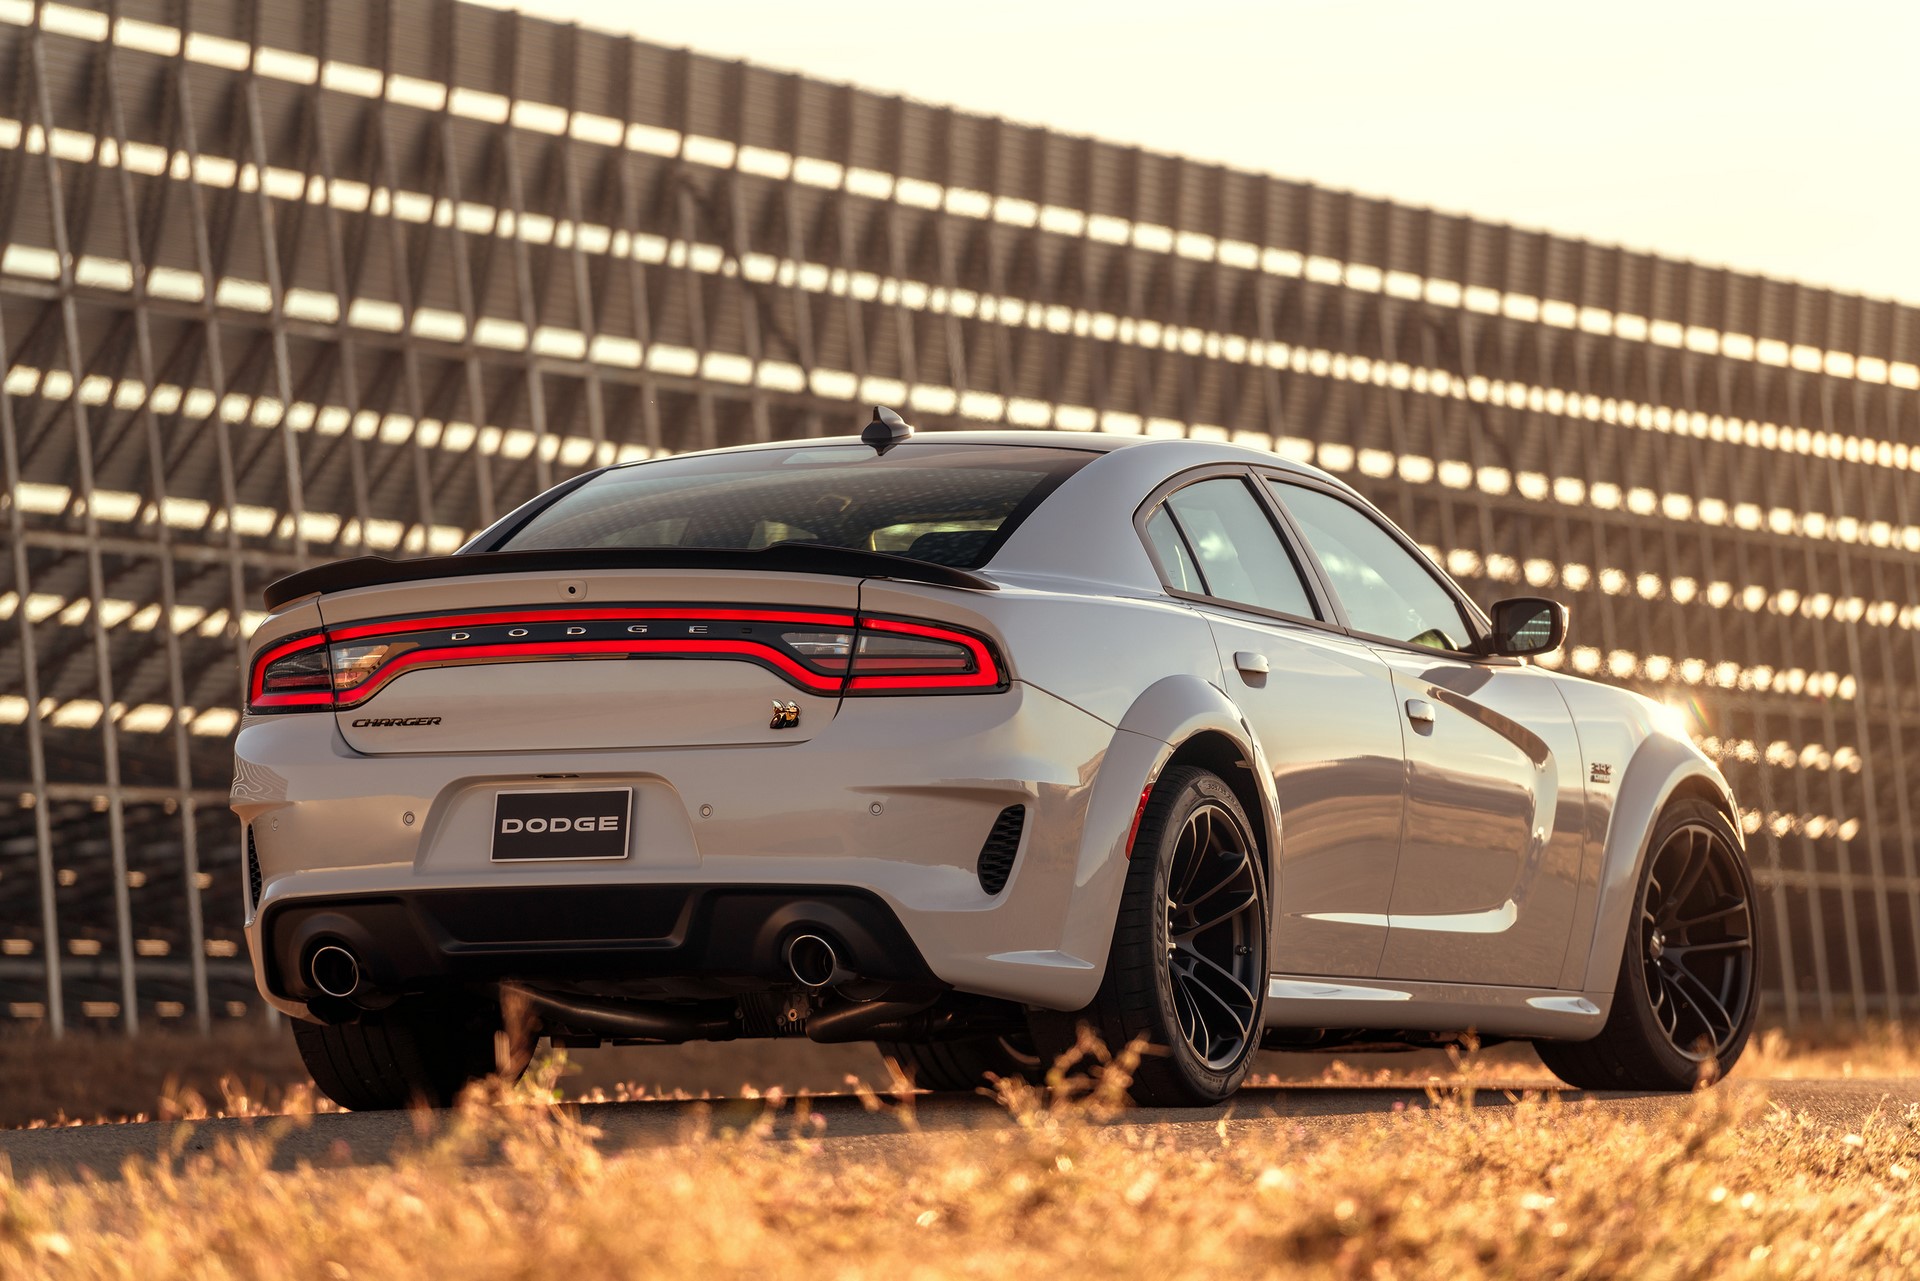 The 2020 Dodge Charger Scat Pack Widebody features a best-in-class, naturally aspirated 485-horsepower from the proven 392 cubic inch HEMI® V-8 engine